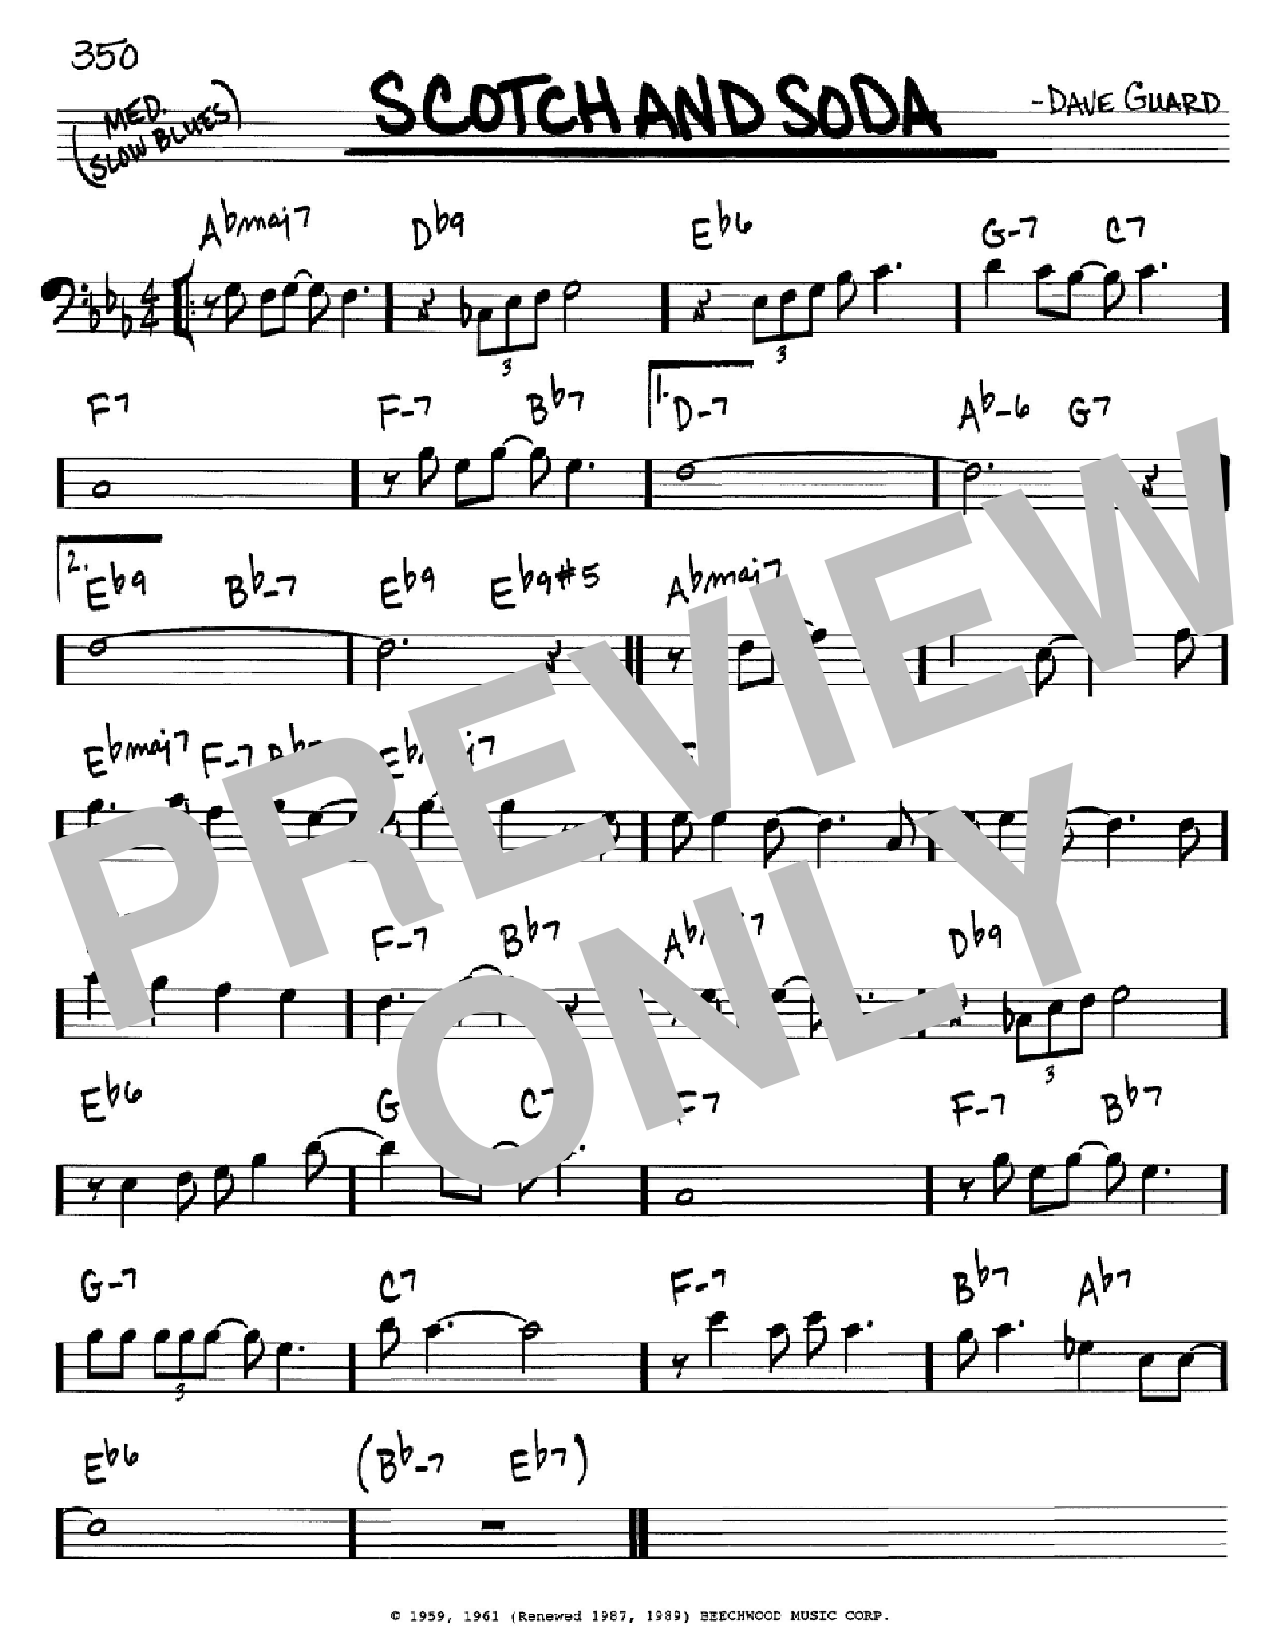 Download The Kingston Trio Scotch And Soda Sheet Music